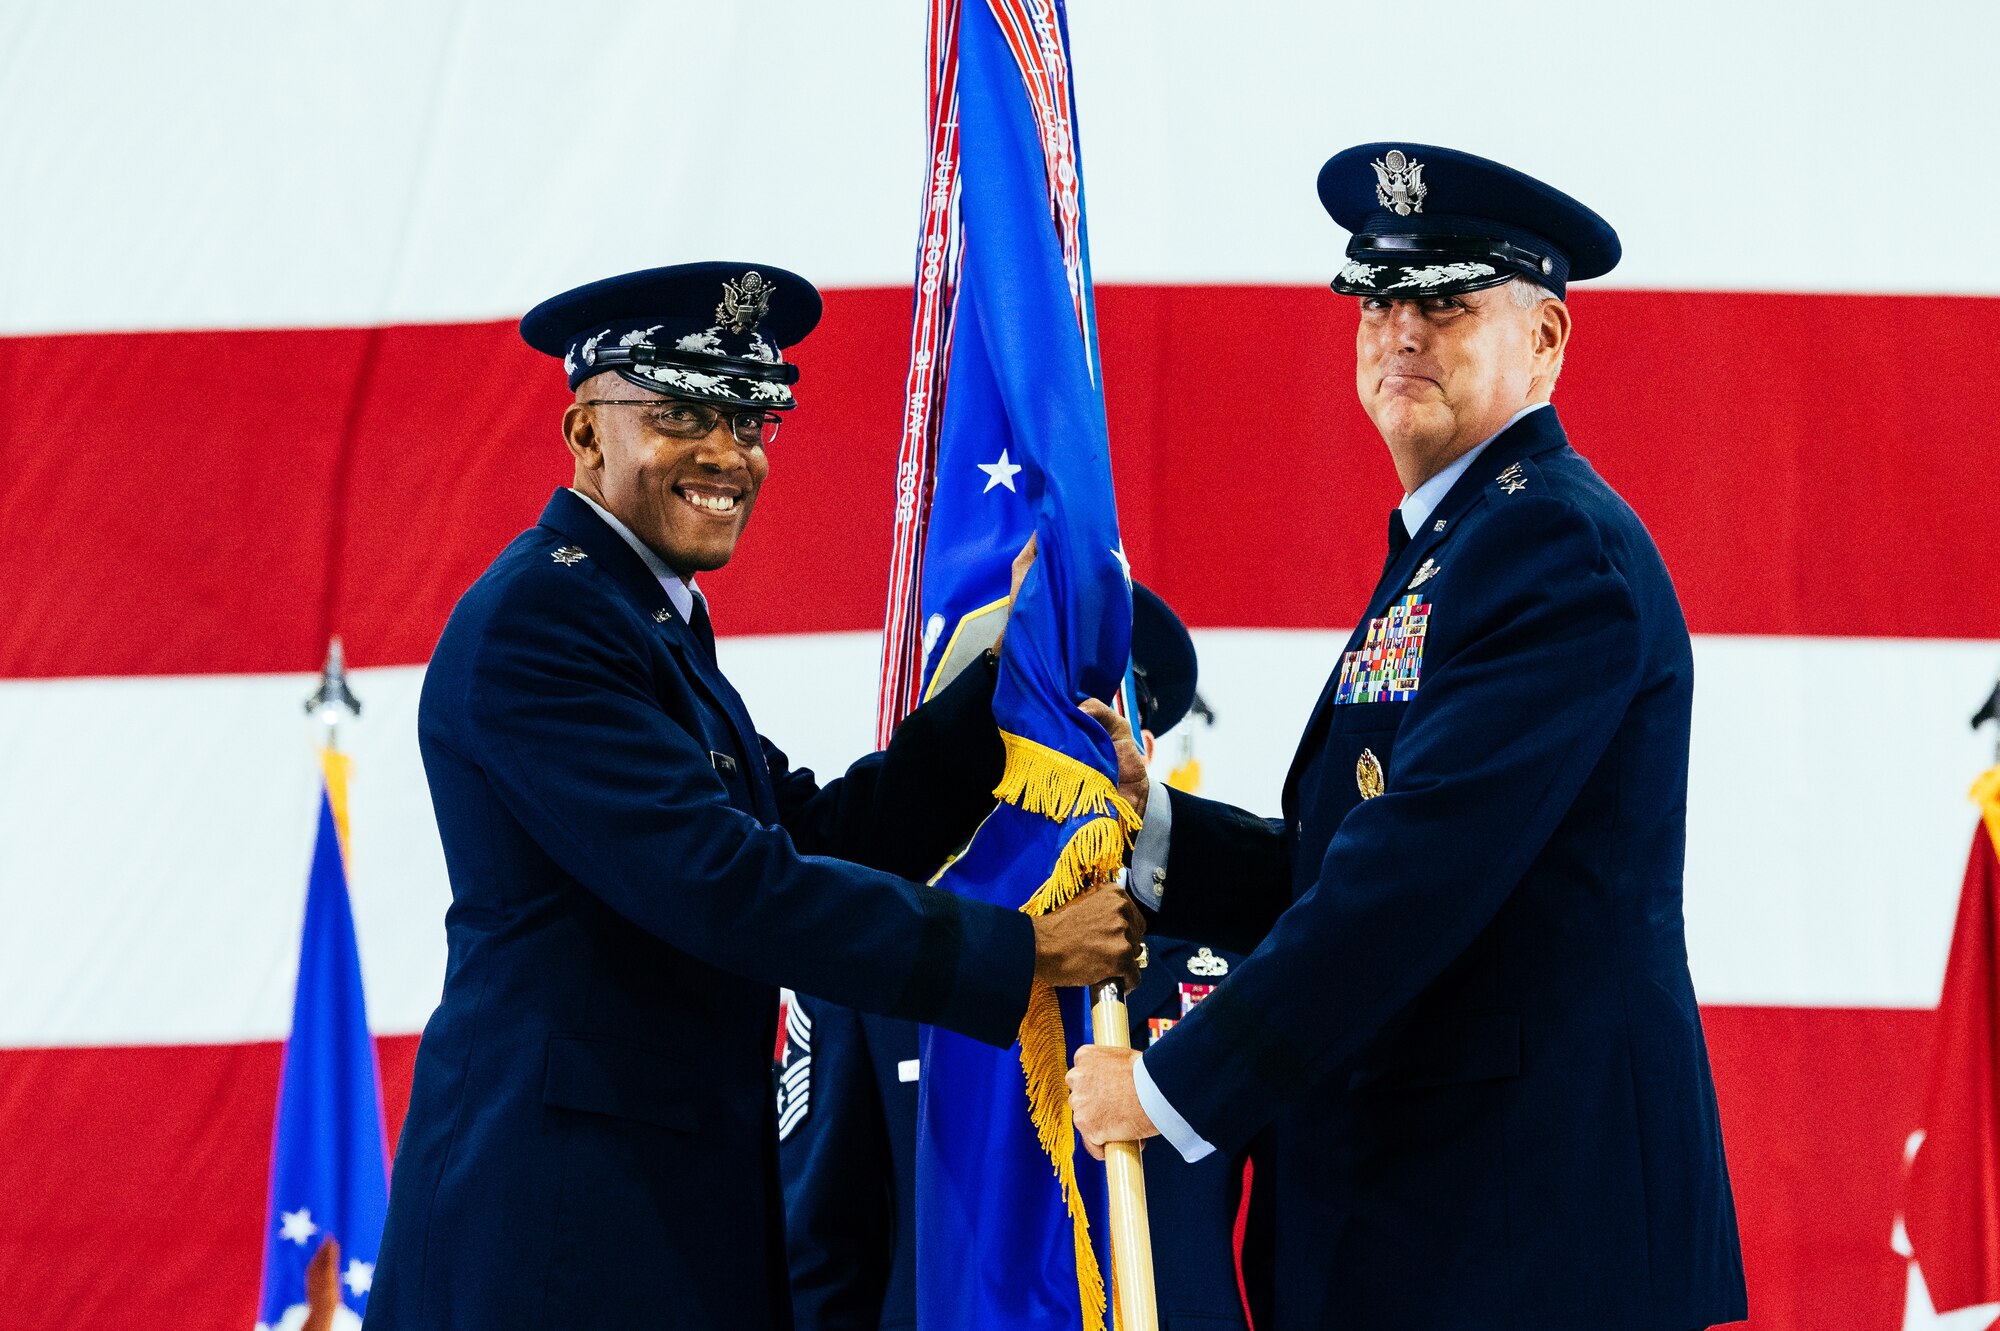 U.S. Air Force Gen. Mike Minihan, right, incoming Air Mobility Command commander, assumes command from Air Force Chief of Staff Gen. CQ Brown, Jr., during the AMC change of command ceremony at Scott Air Force Base, Illinois, Oct. 5, 2021. AMC provides rapid global mobility and sustainment for America’s armed forces. (U.S. Air Force Photo by Airman 1st Class Isaac Olivera)